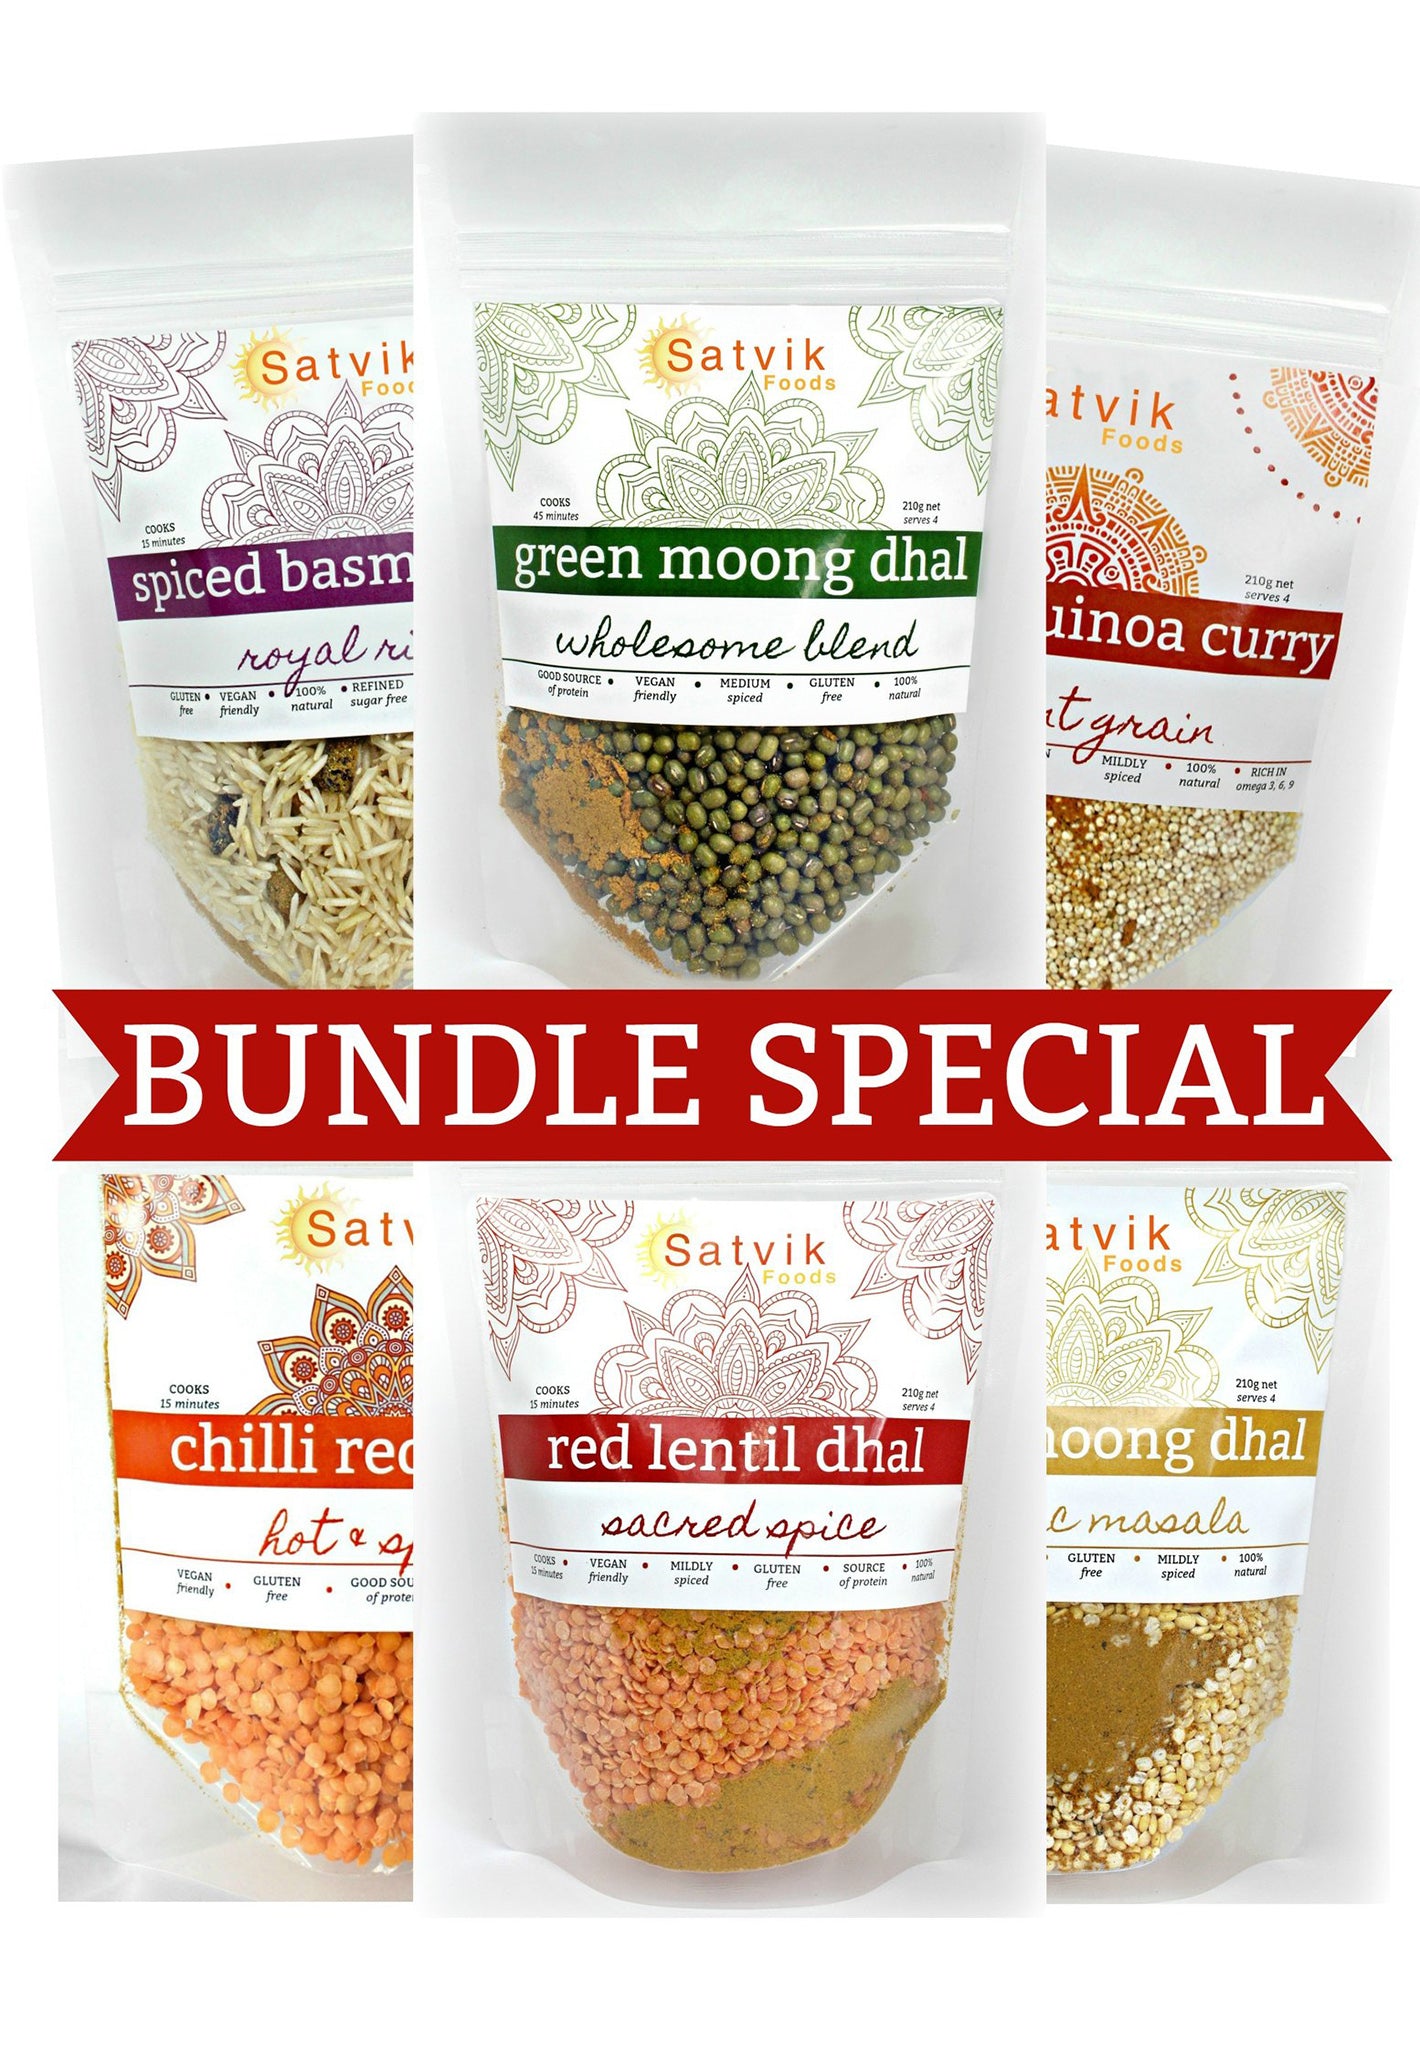 Bundle special features Satvik foods easy meal packs. Spiced basmati rice, green moong dhal, organic quinoa curry, chilli red lentil, red lentil dhal, yellow moong dhal. this is a great starter pack for anyone wanting to try our naturally gluten free vegan range. easy and delicious with Ayurvedic spice blends